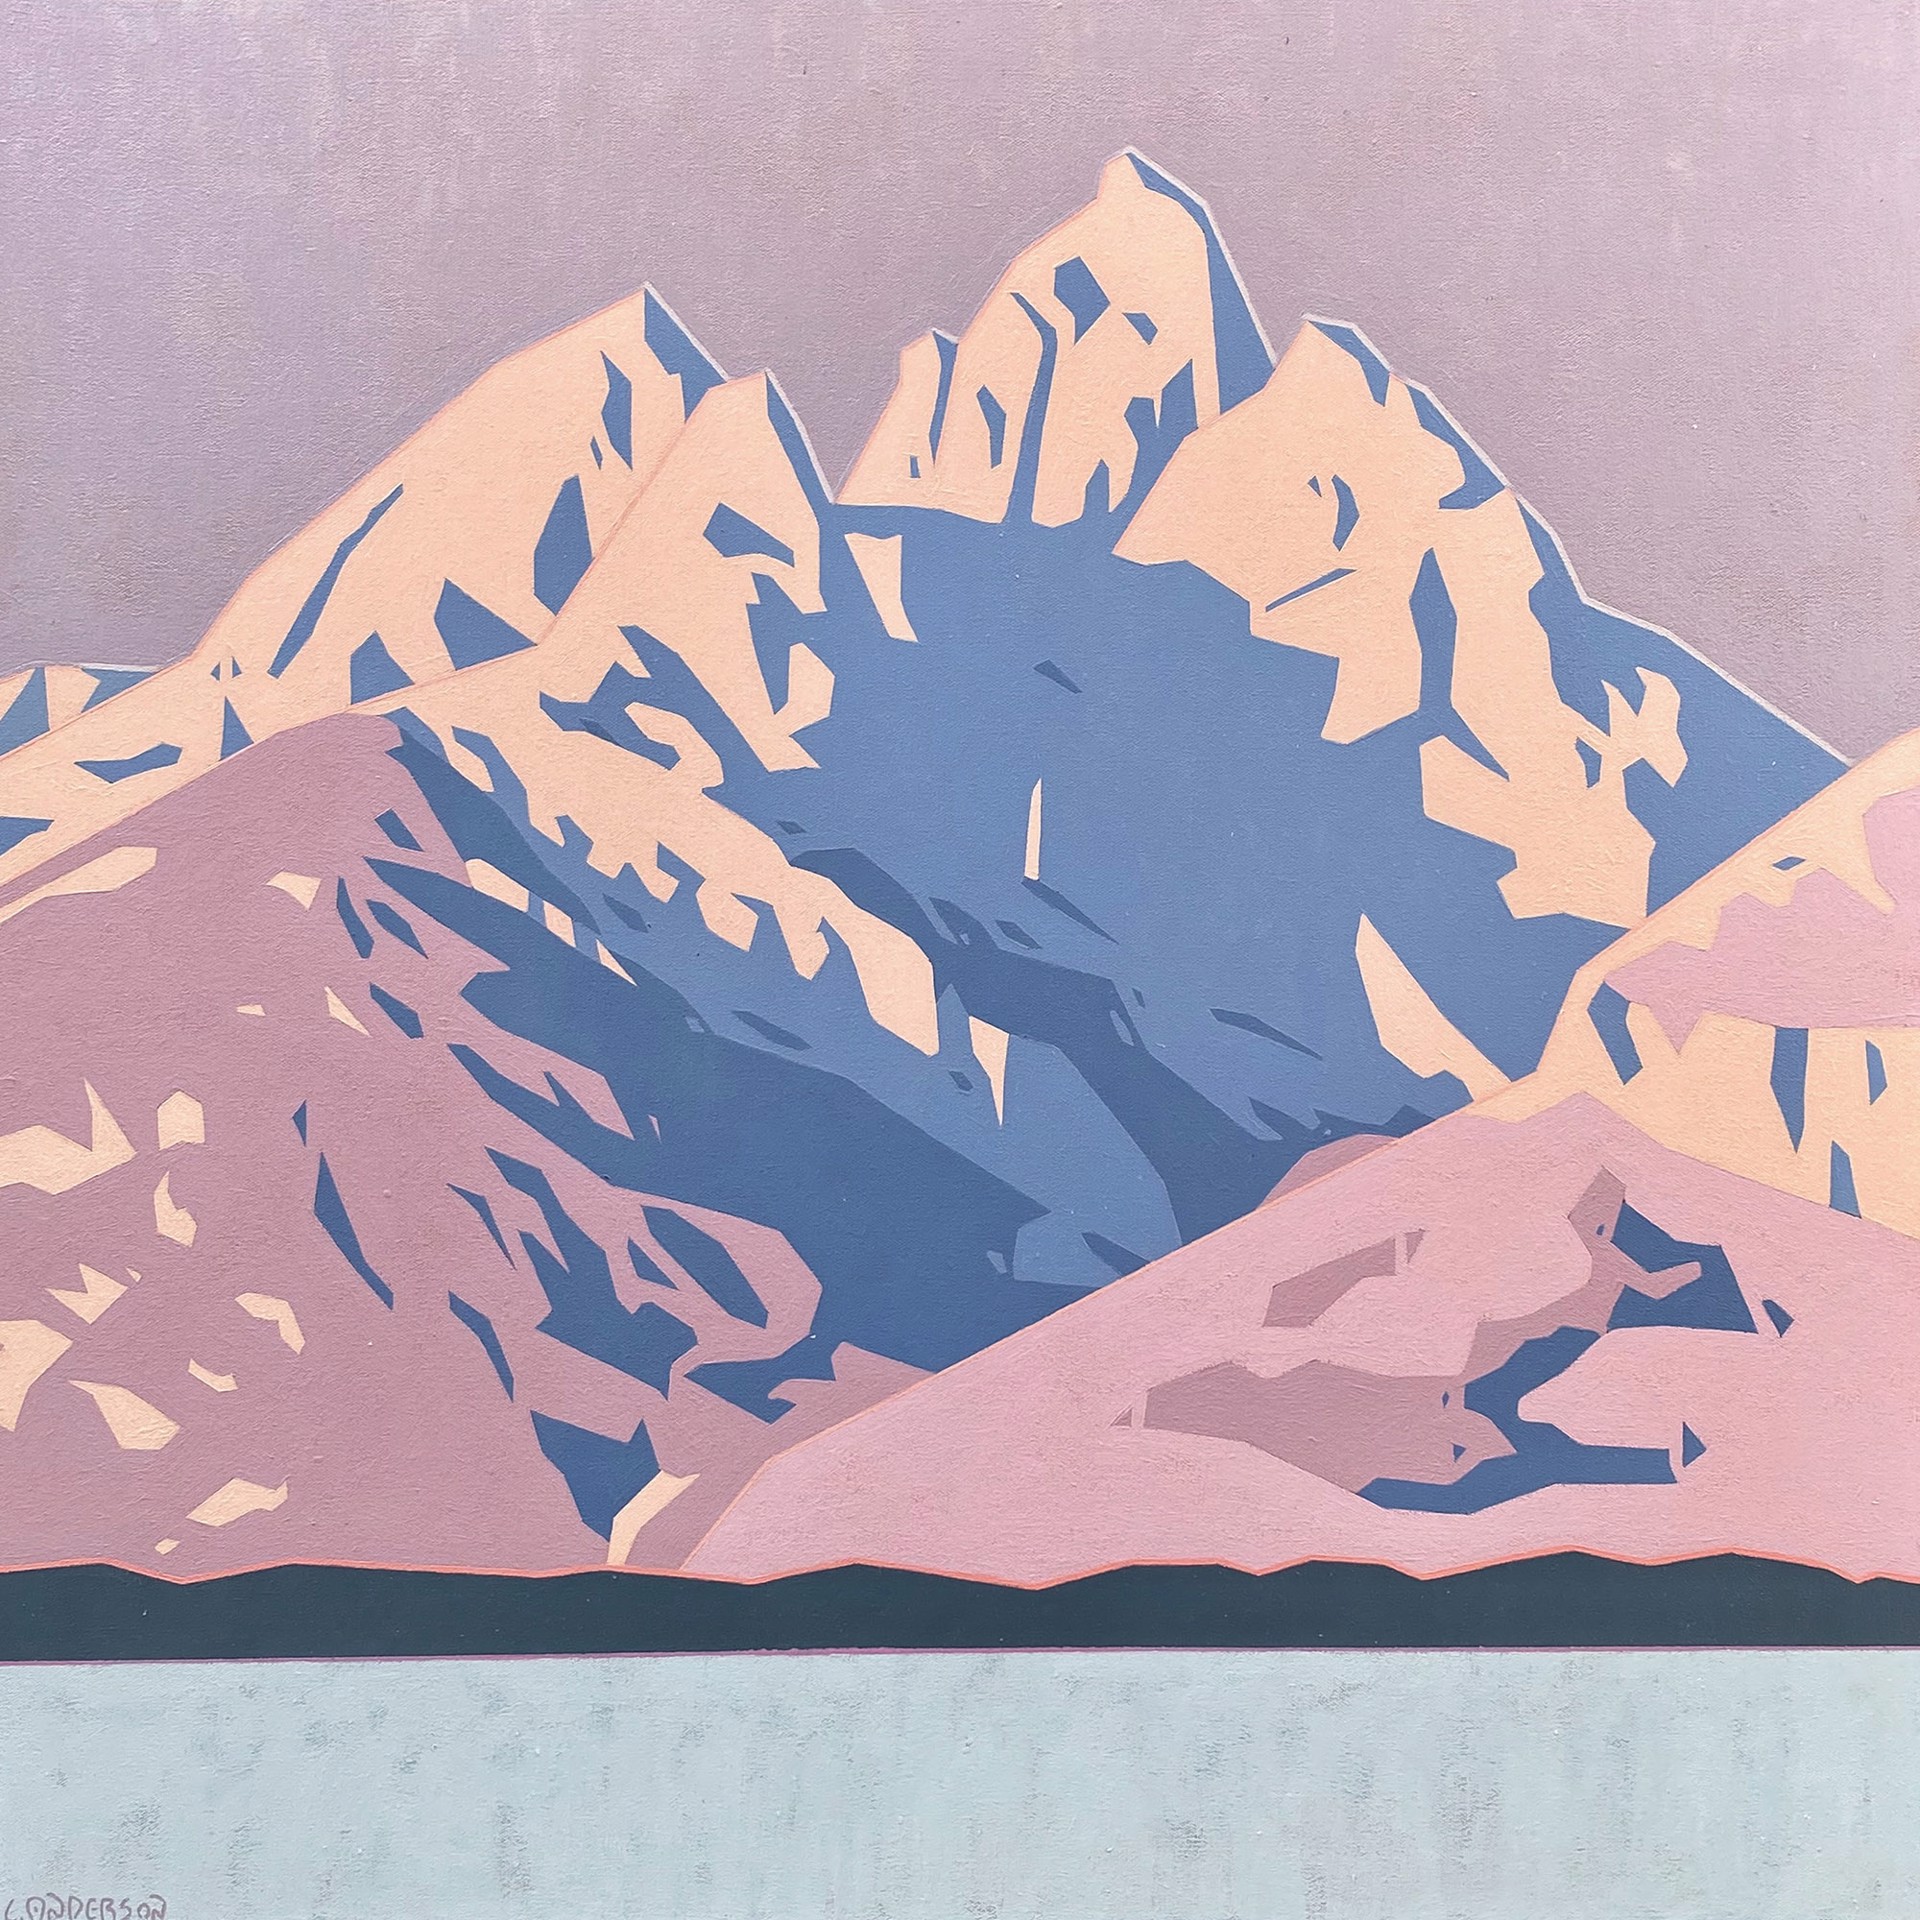 Original Artwork By Luke Anderson Featuring The Teton Mountain Range In Pink And Purple Hues In A Graphic Pop Art Style